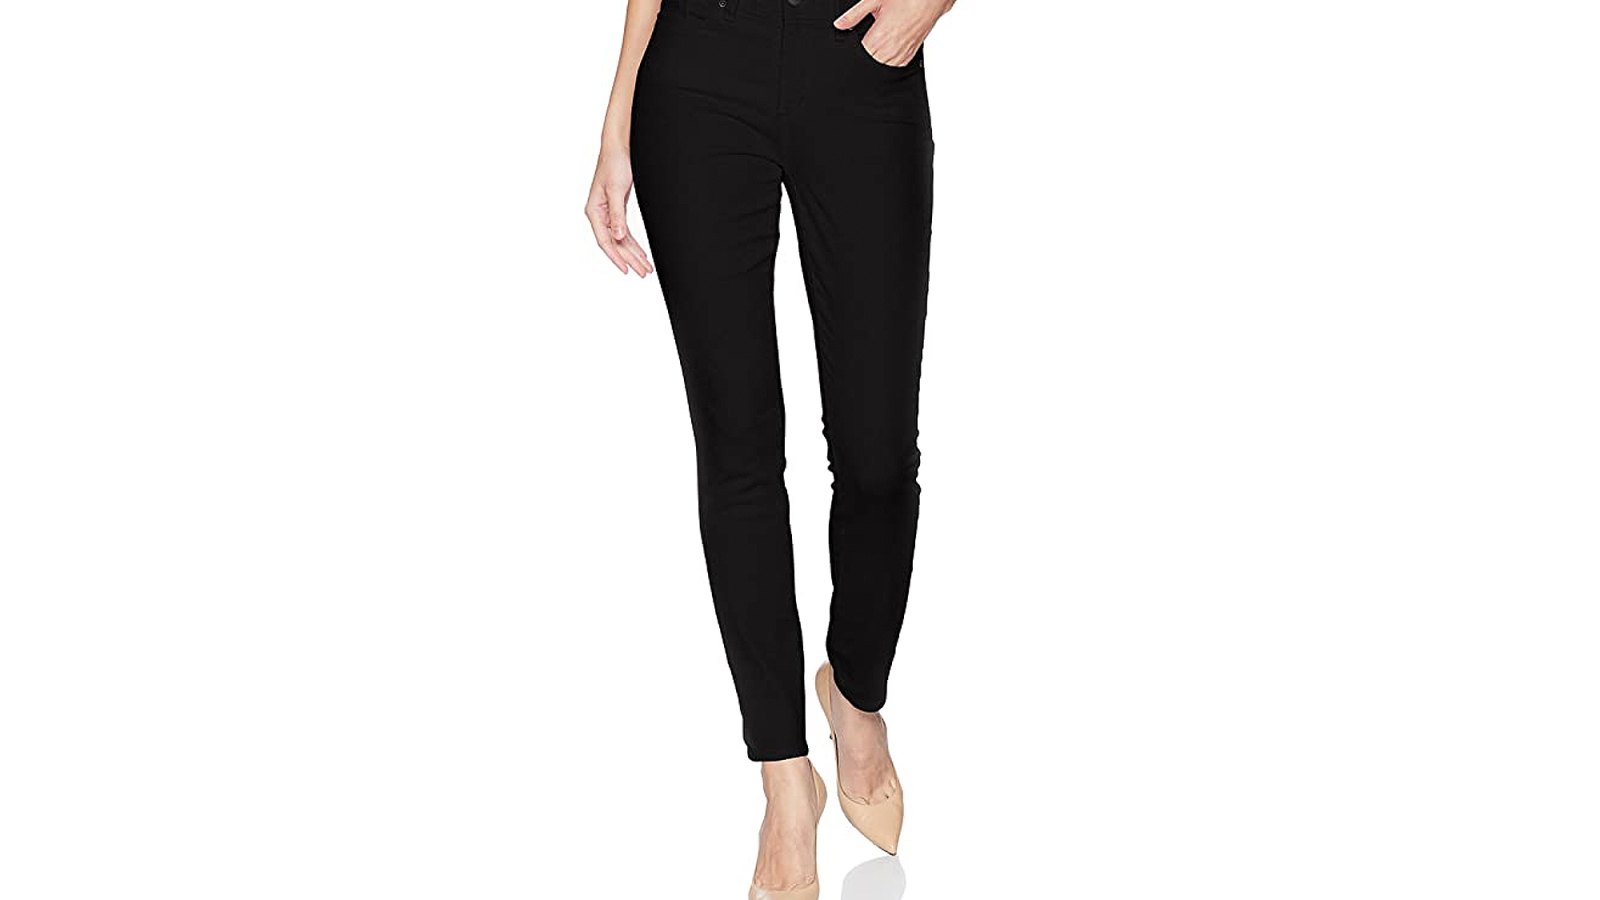 NYDJ ‘Perfect’ Legging Jeans Are 52% Off on Amazon — Today Only | UsWeekly